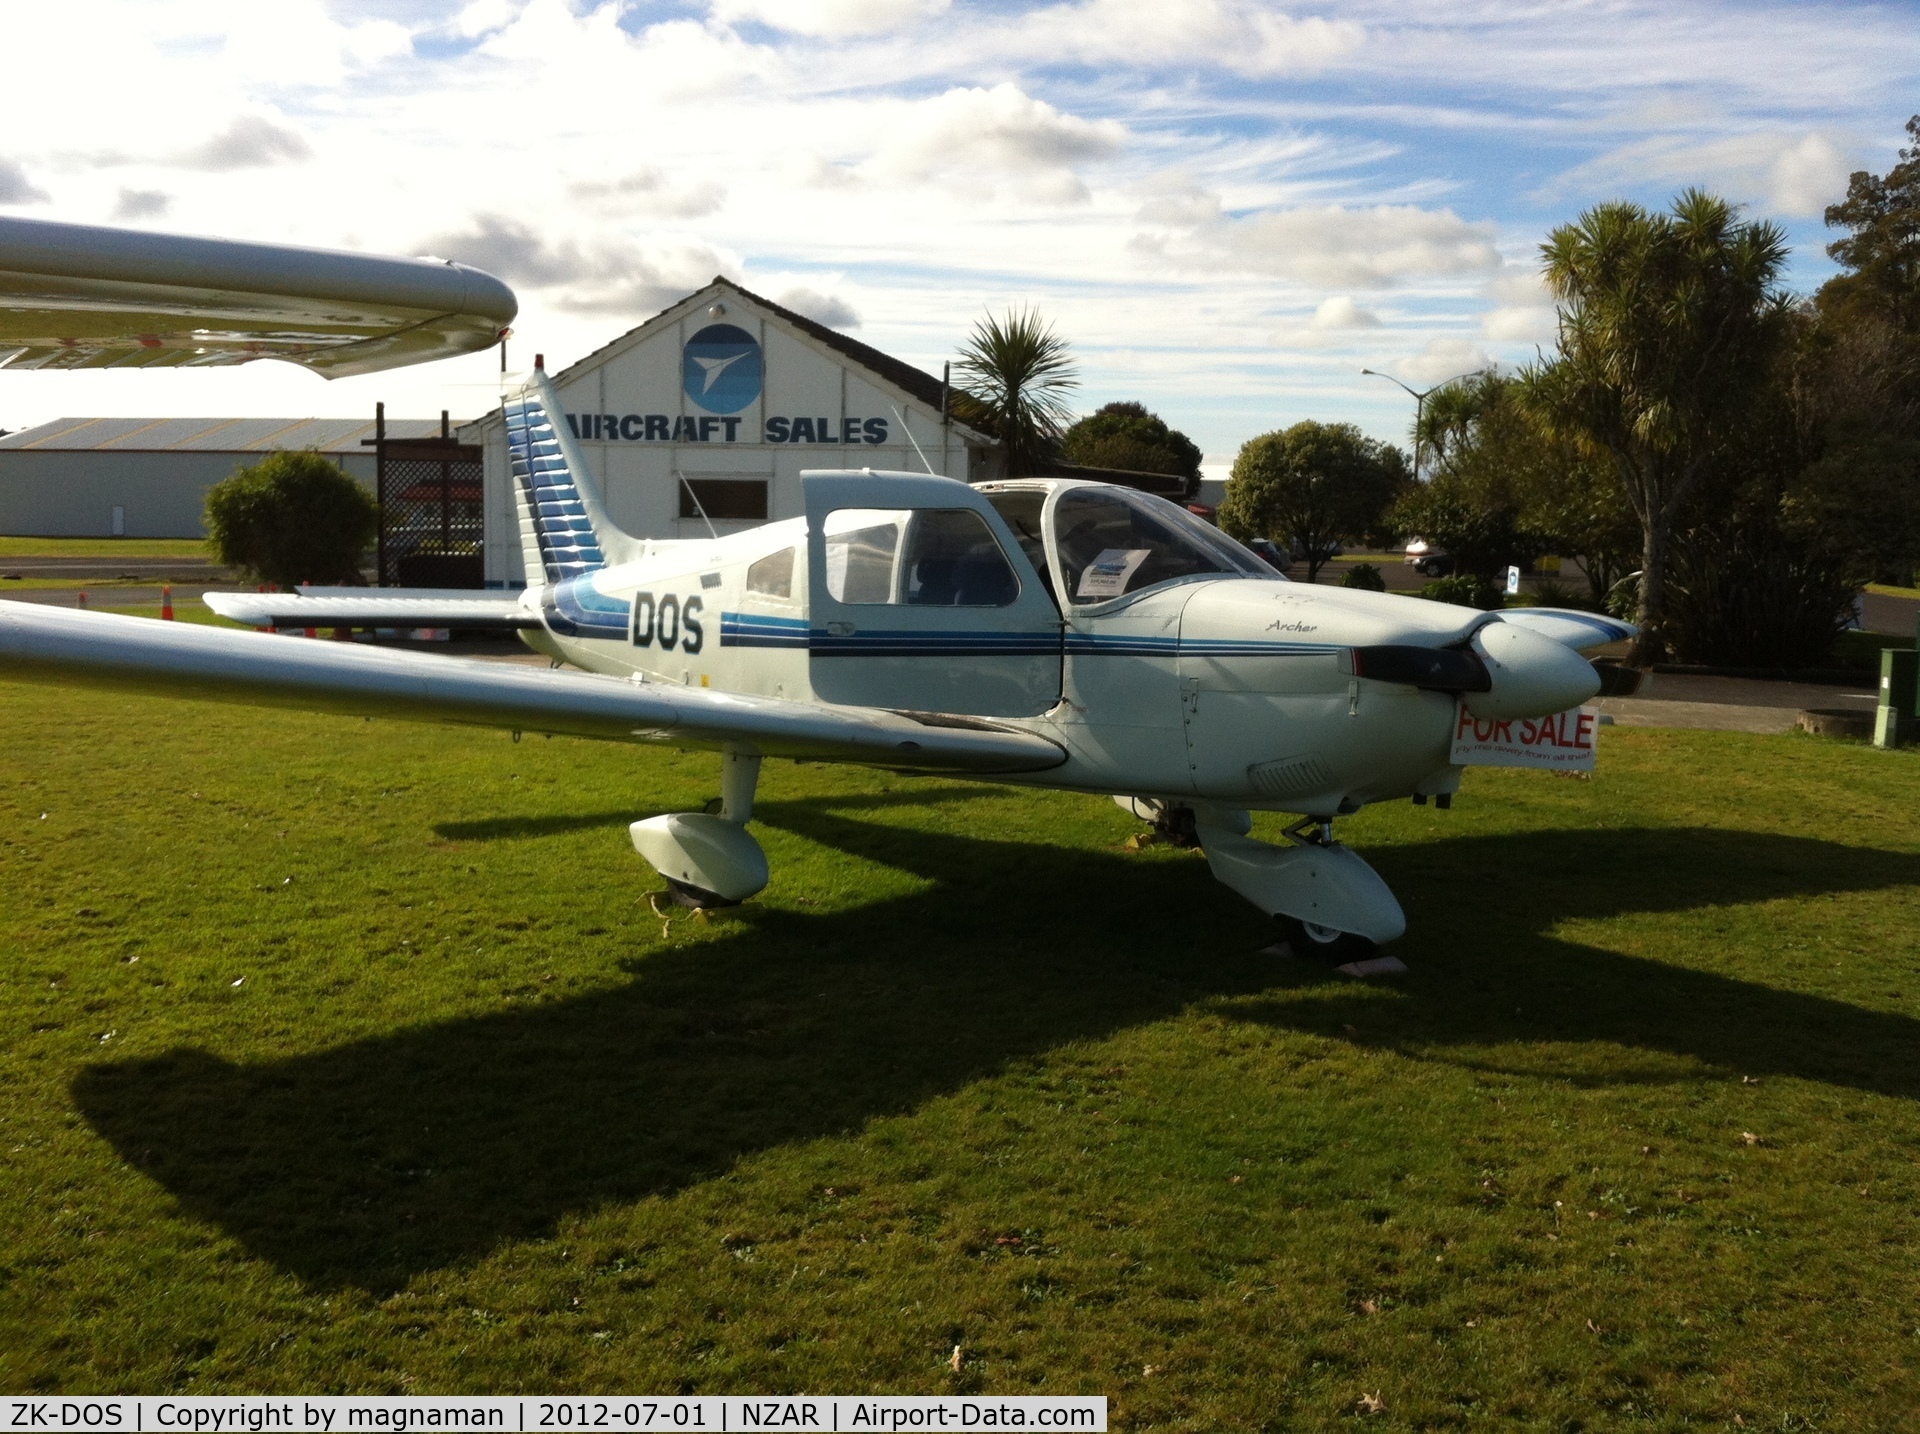 ZK-DOS, Piper PA-28-180 Cherokee C/N 28-7405002, Up for sale at Ardmore.